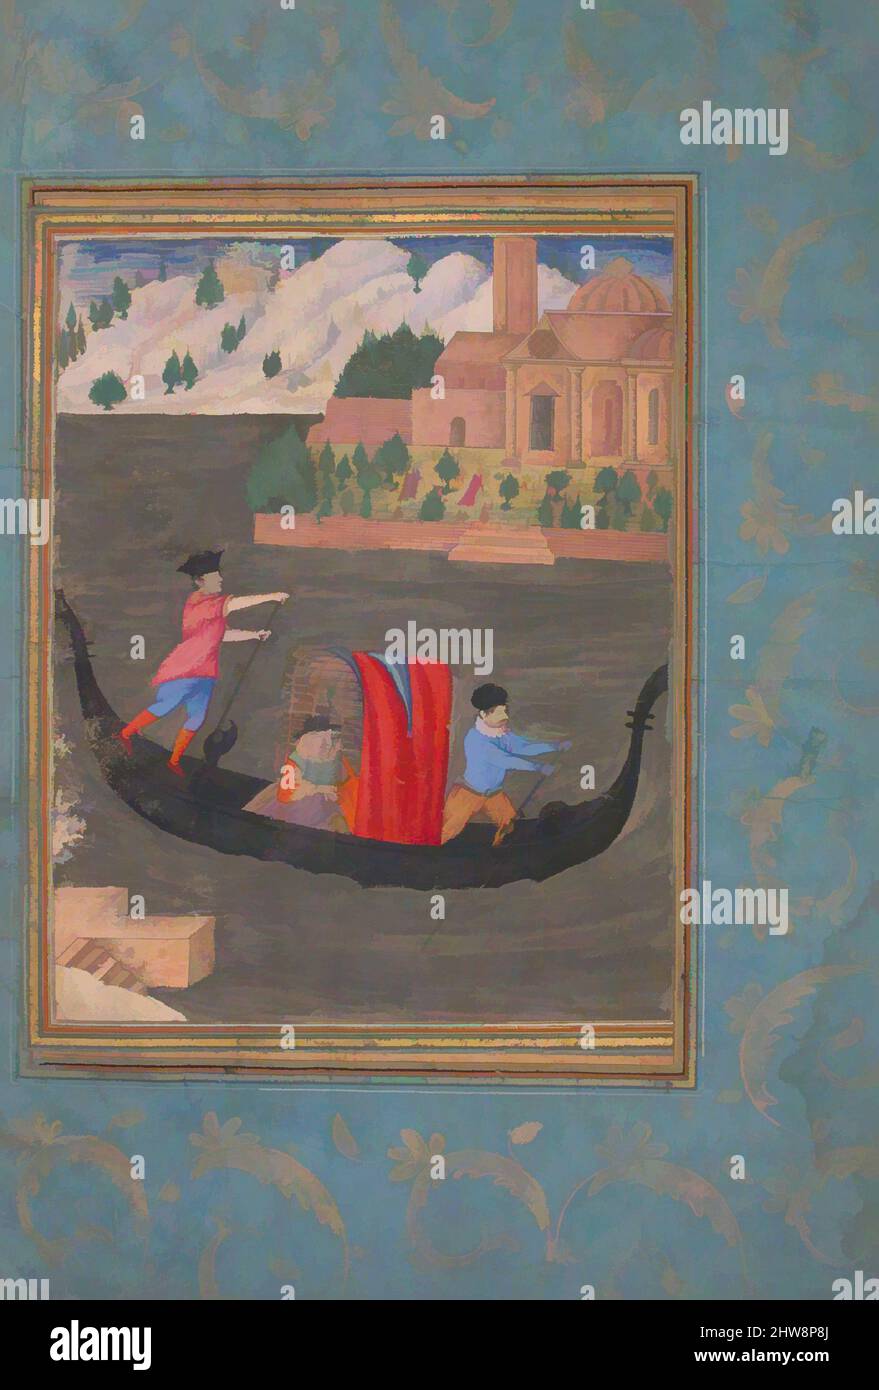 Art inspired by Aquatic Scene with Three Men in a Gondola, late 16th–early 17th century, Attributed to Turkey, Ink, opaque watercolor, and gold on paper, Page:, Codices, This curious painting, perhaps created as a single-leaf composition destined for the album of a collector, depicts, Classic works modernized by Artotop with a splash of modernity. Shapes, color and value, eye-catching visual impact on art. Emotions through freedom of artworks in a contemporary way. A timeless message pursuing a wildly creative new direction. Artists turning to the digital medium and creating the Artotop NFT Stock Photo